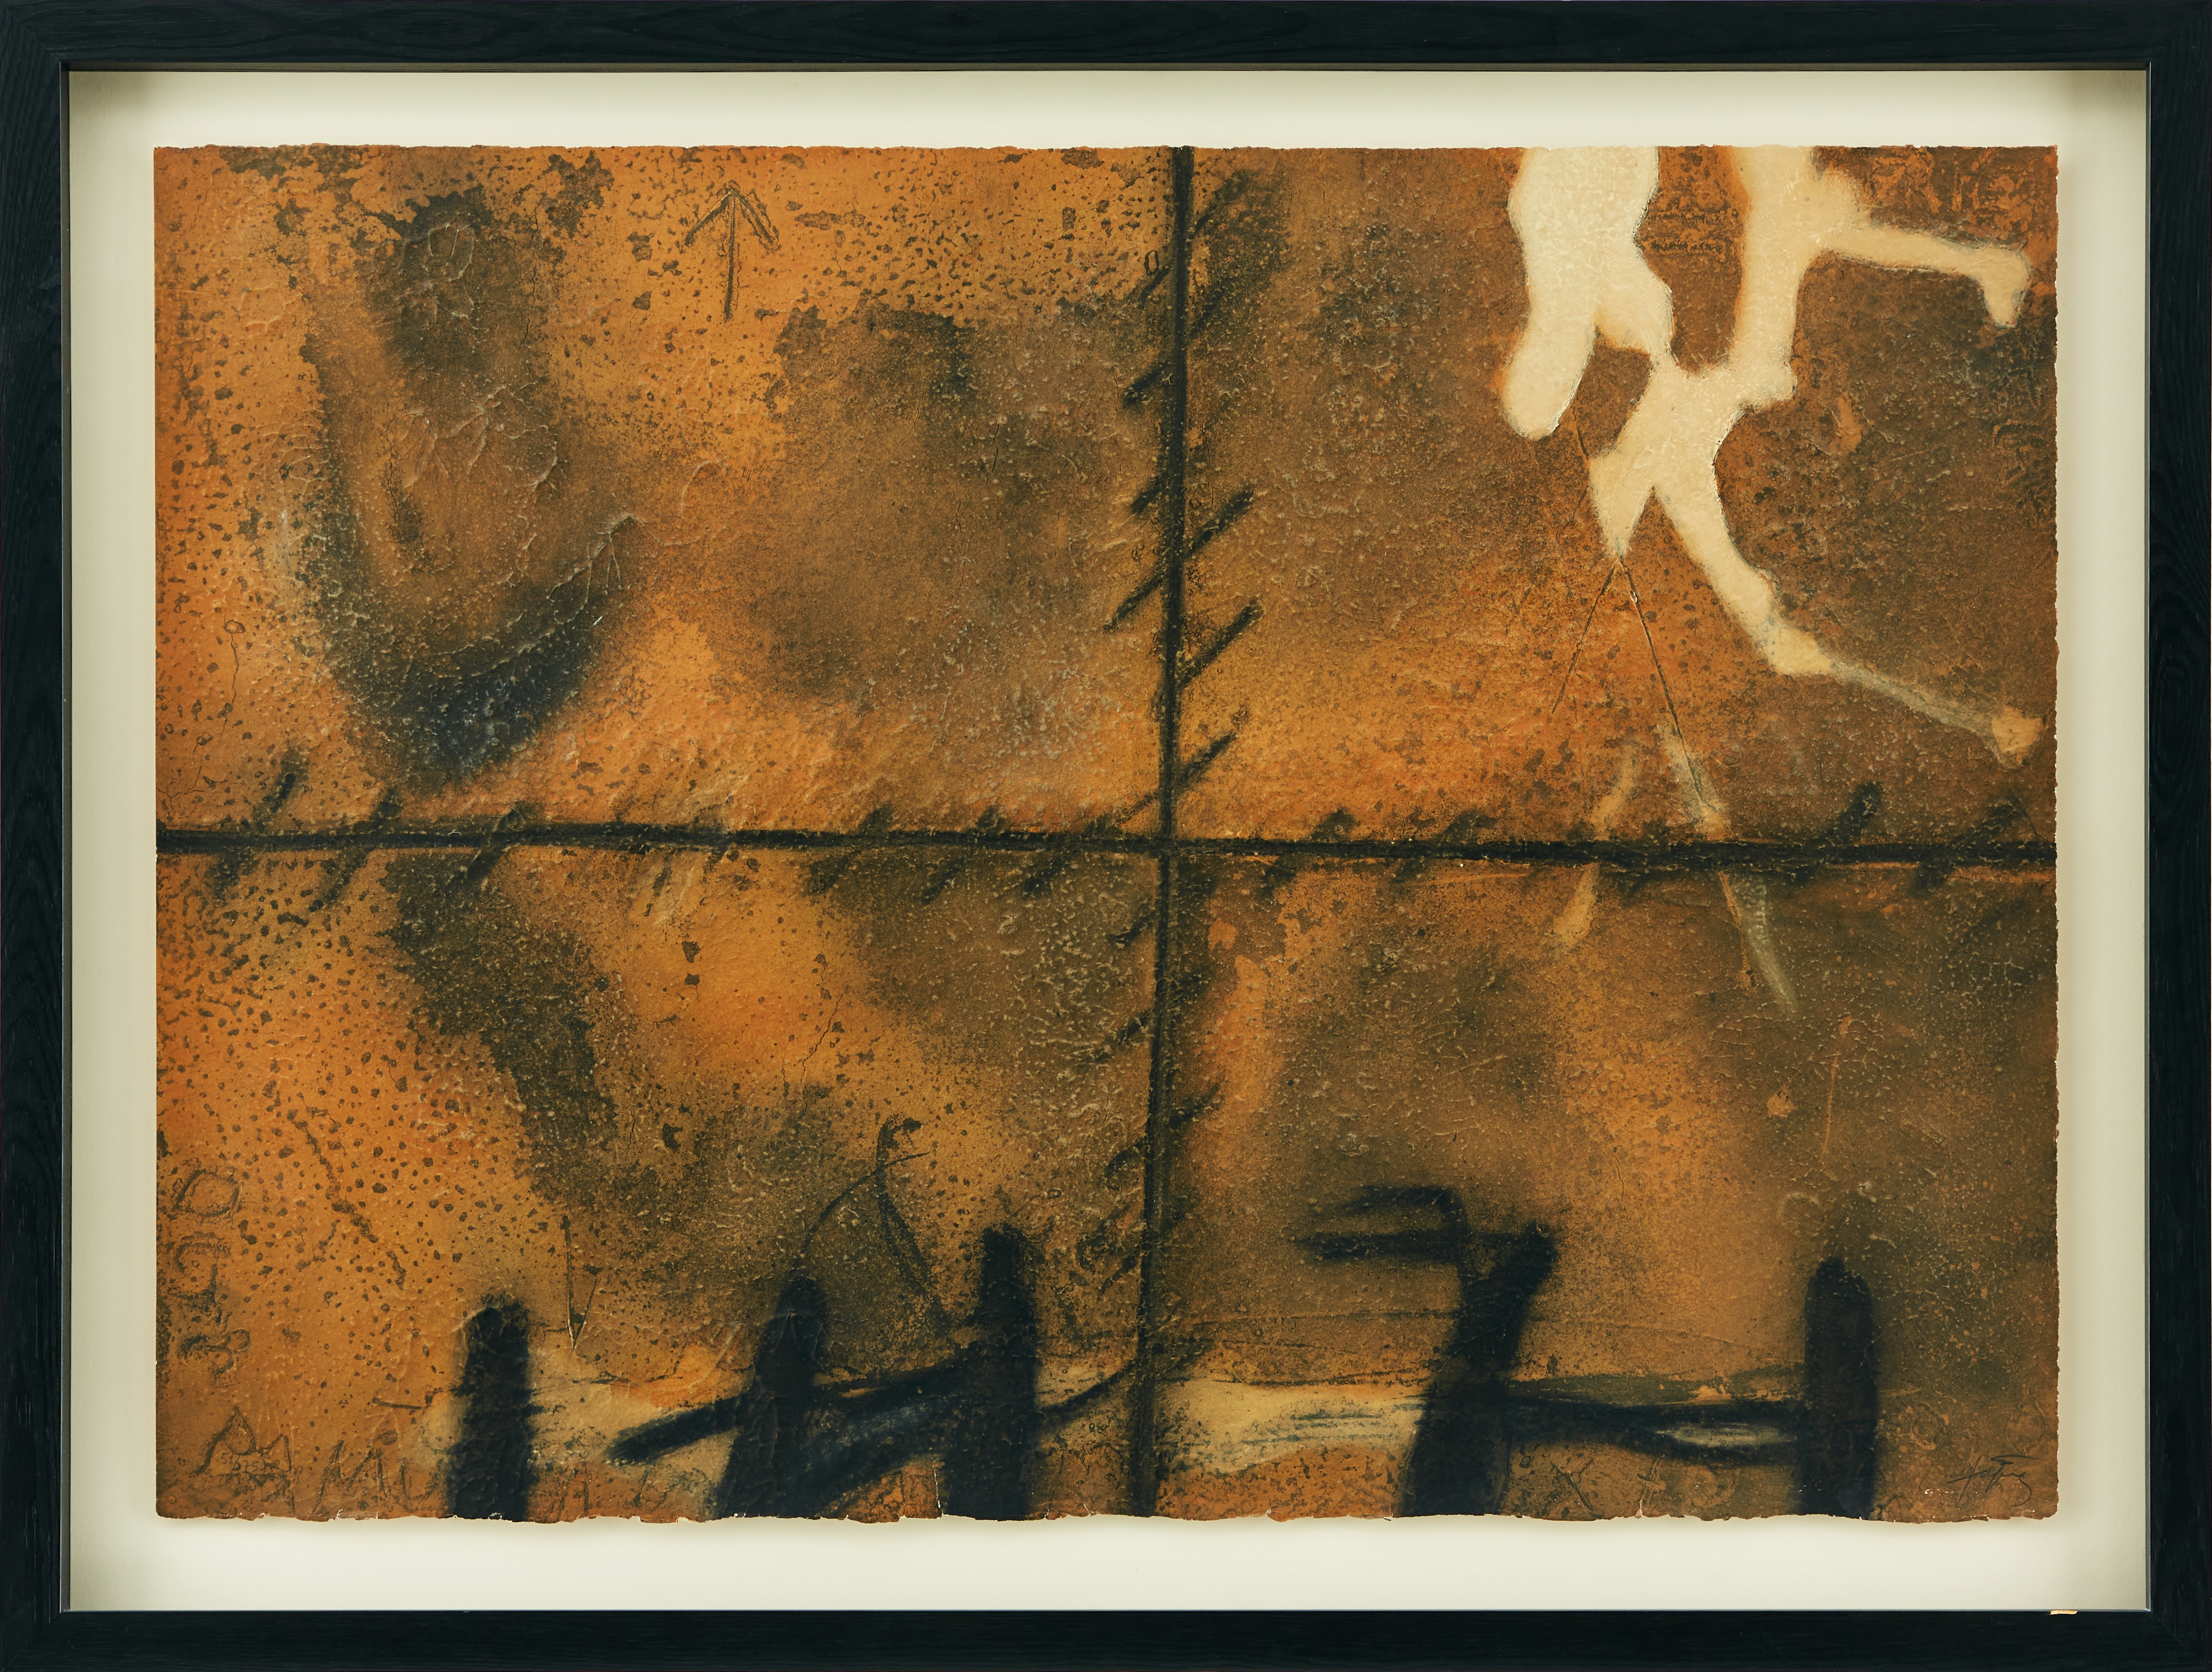 Artwork by Antoni Tàpies, Matière, Made of Color etching with carborundum on Chiffon de Mandeure